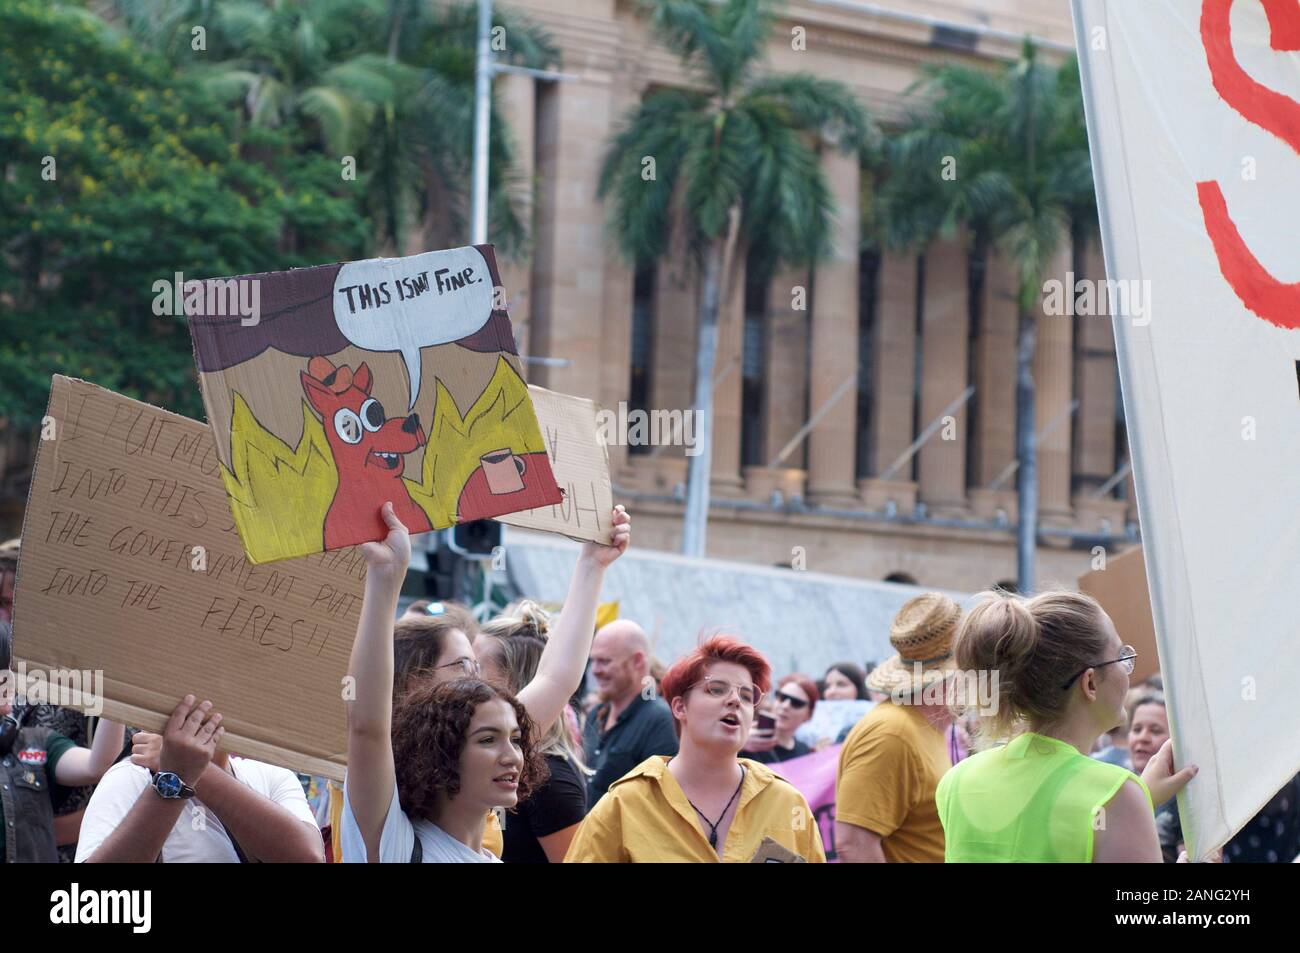 Brisbane, Queensland, Australia - 10th January 2020 : A woman holds a sign protesting government inaction during a rally for climate change action in Stock Photo